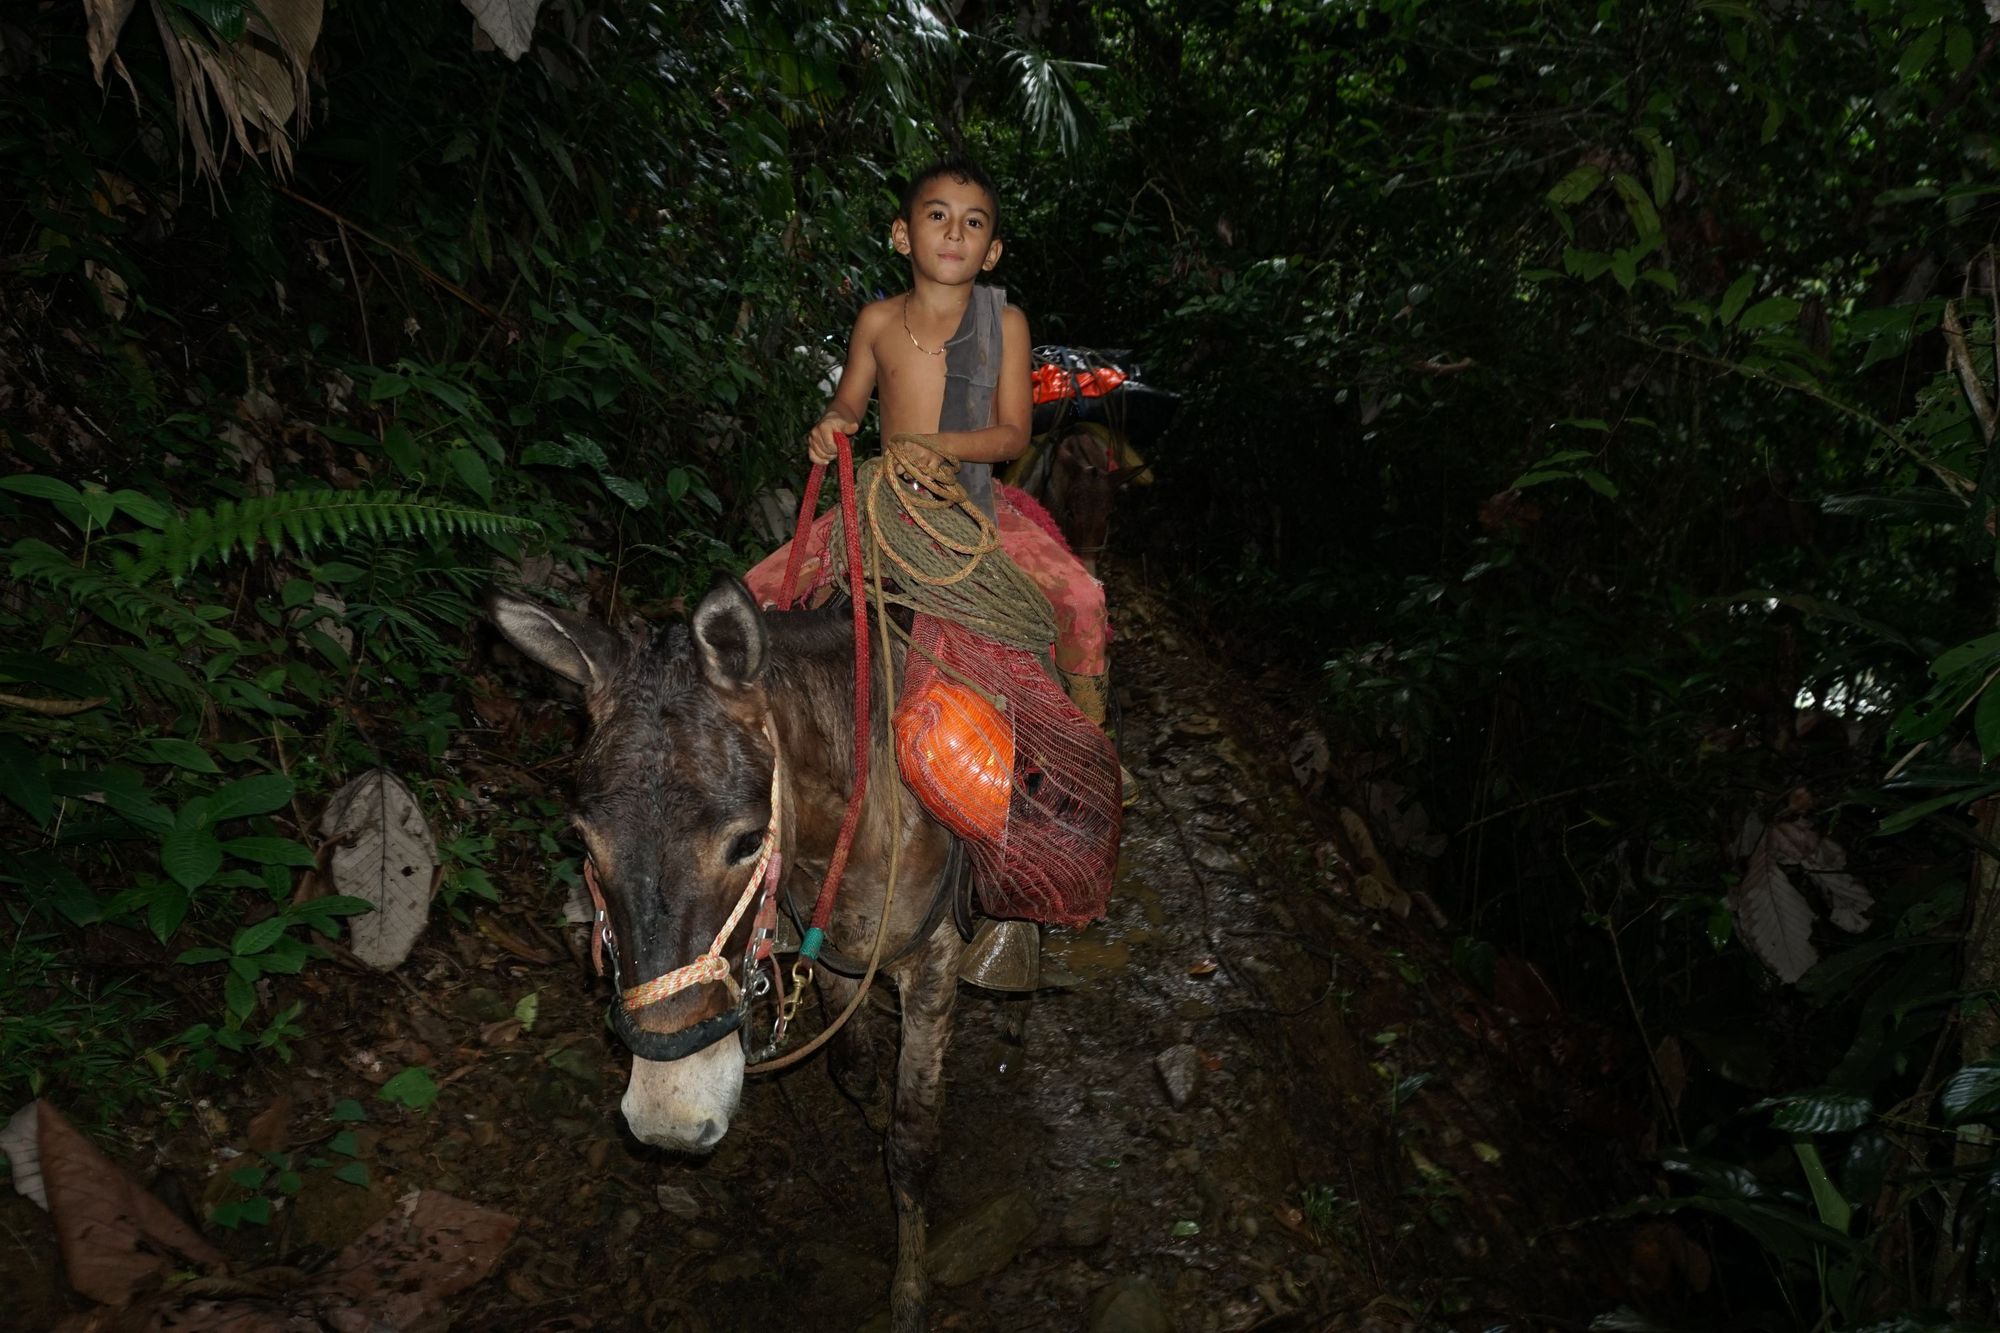 A young boy riding a mule in the Colombian rainforest